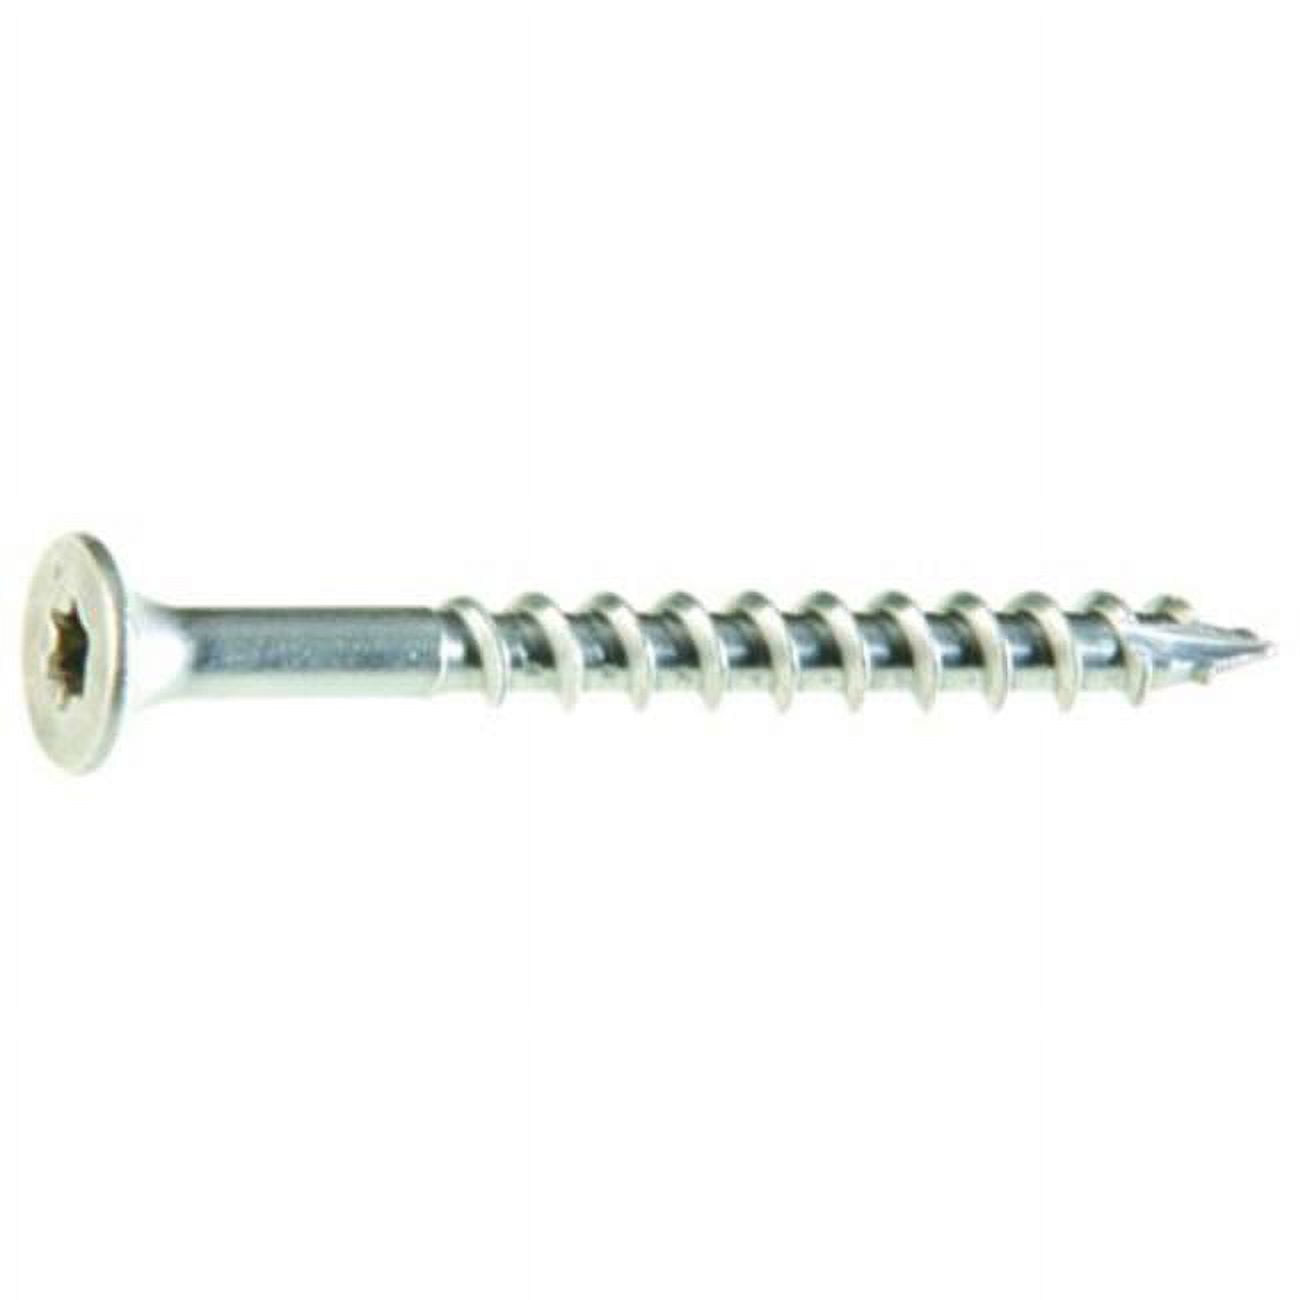 Prime Source Maxs62689 No. 1 1.62 In. Stainless Steel Deck Screw